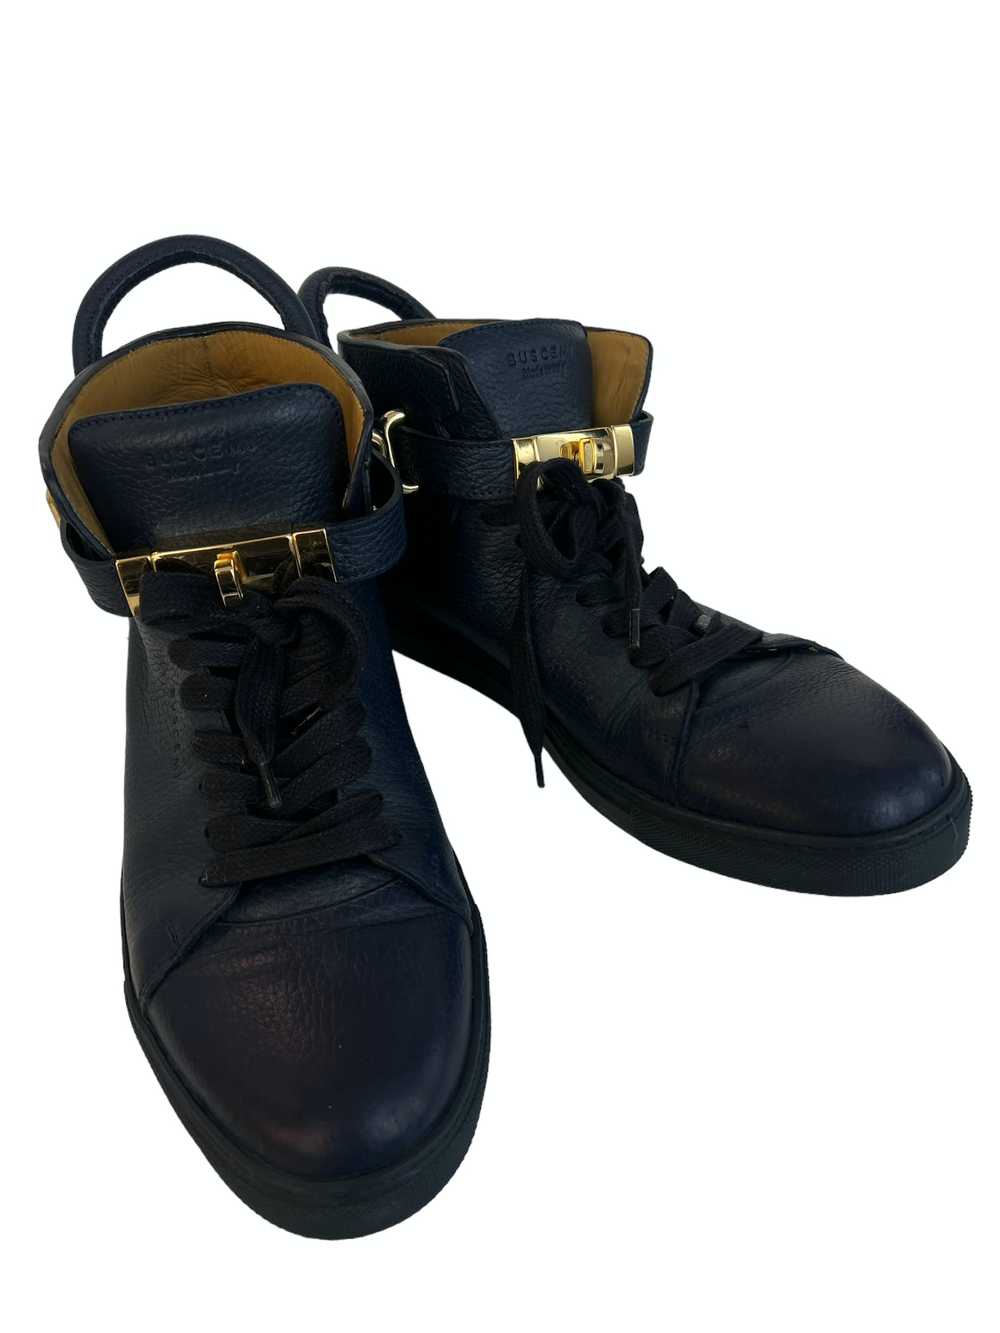 Buscemi Buscemi 100 mm high tops sneakers - image 7